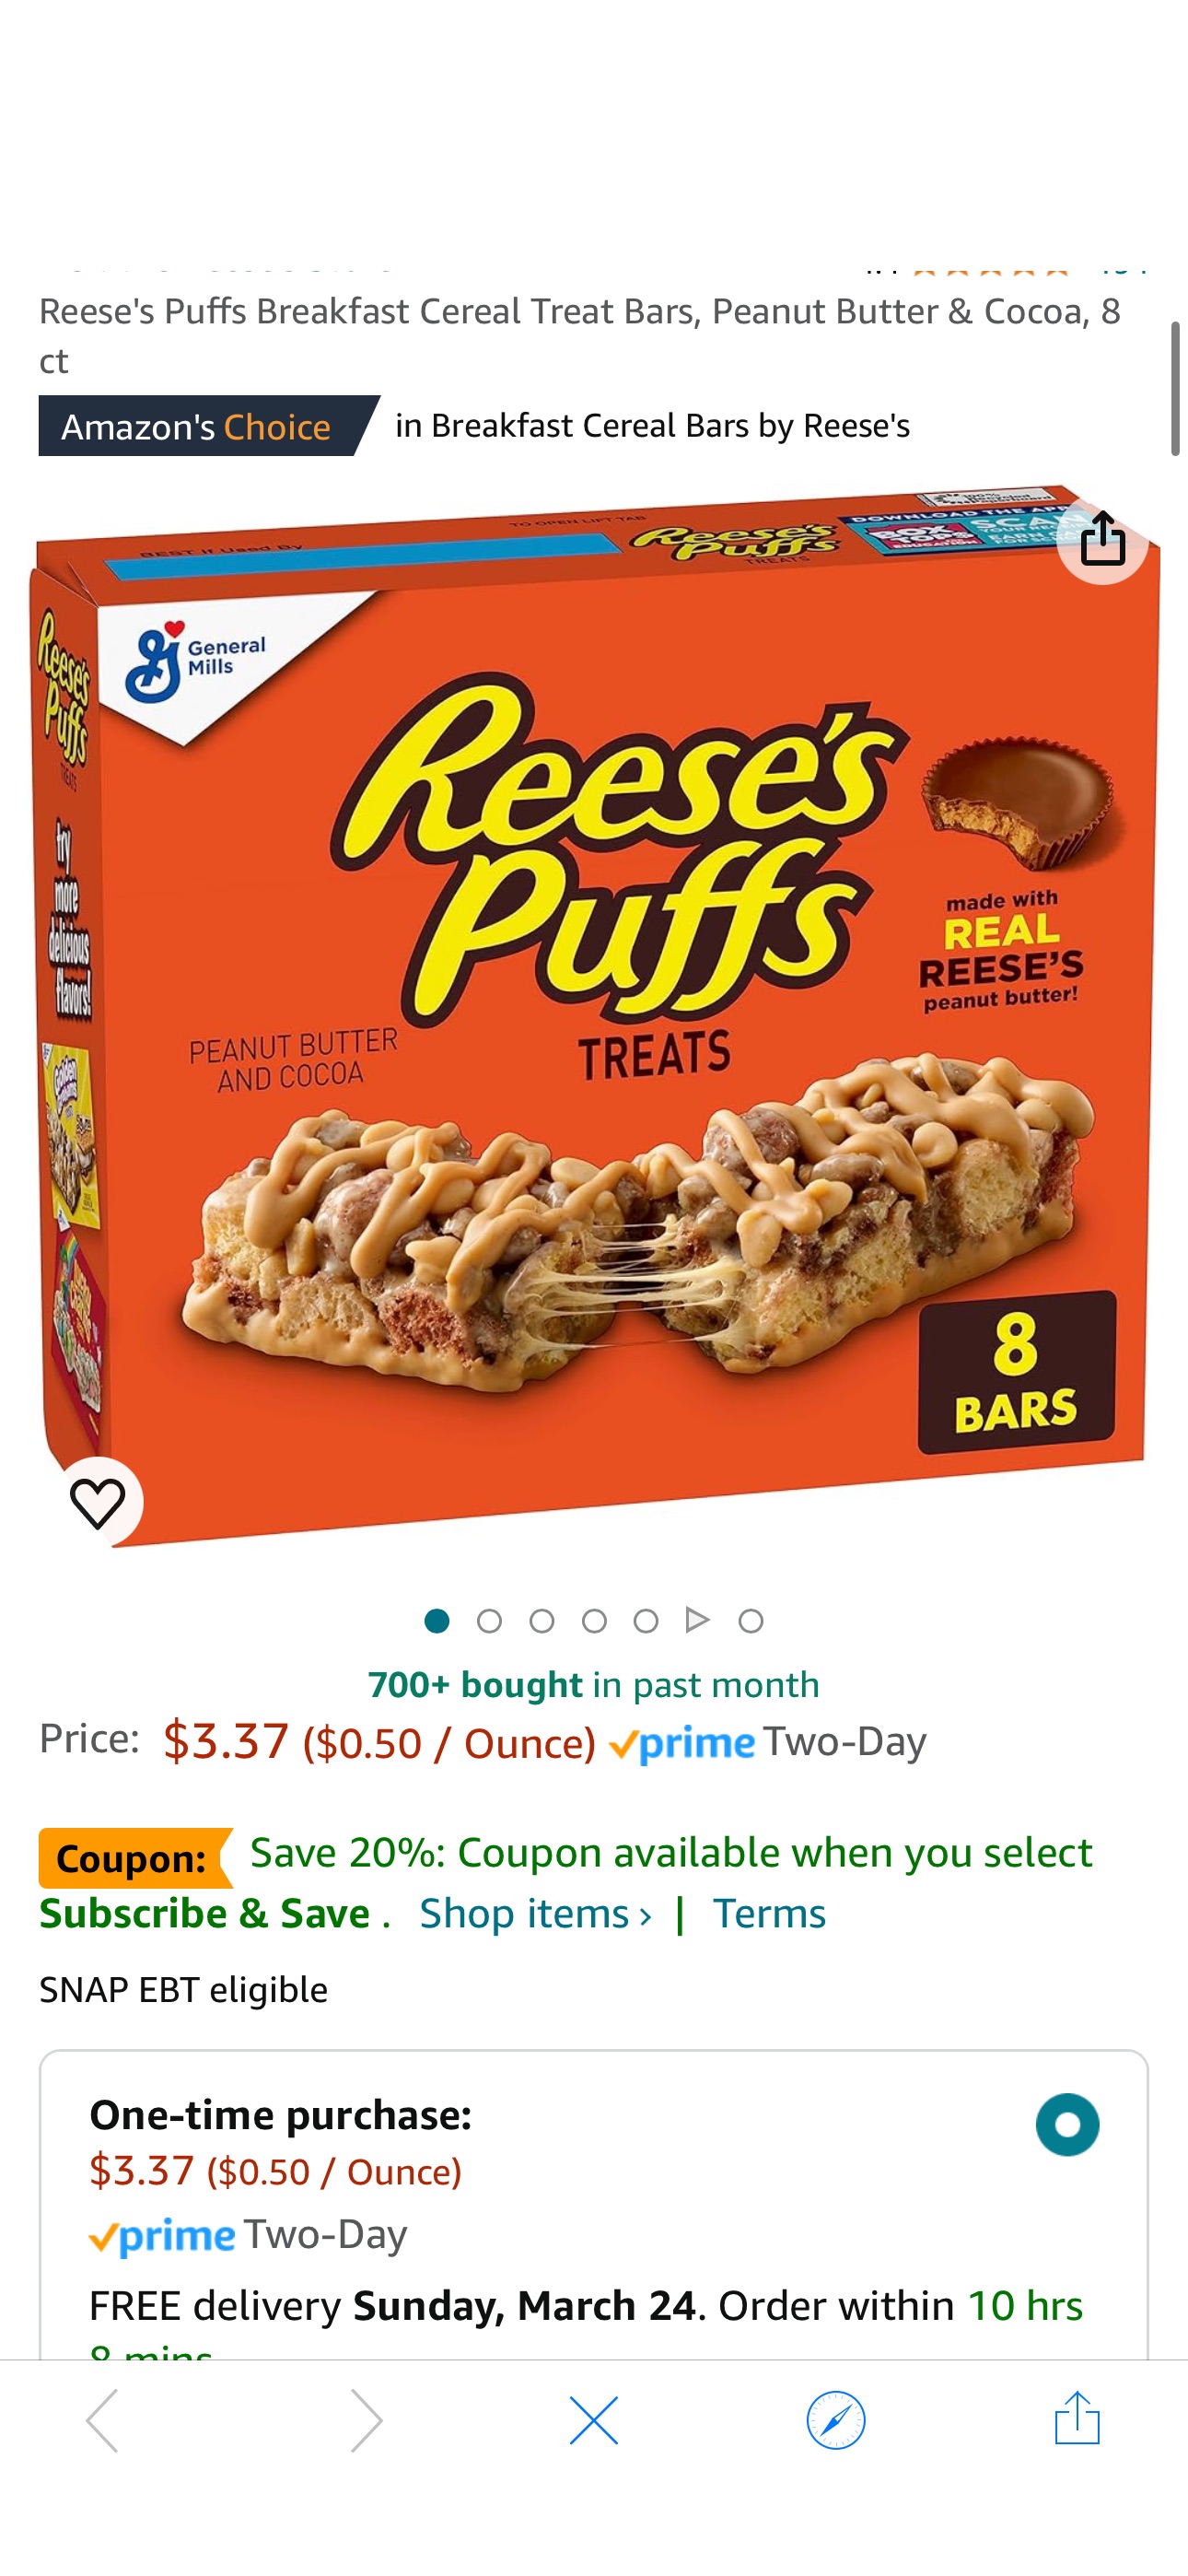 Amazon.com: Reese's Puffs Breakfast Cereal Treat Bars, Peanut Butter & Cocoa, 8 ct coupon